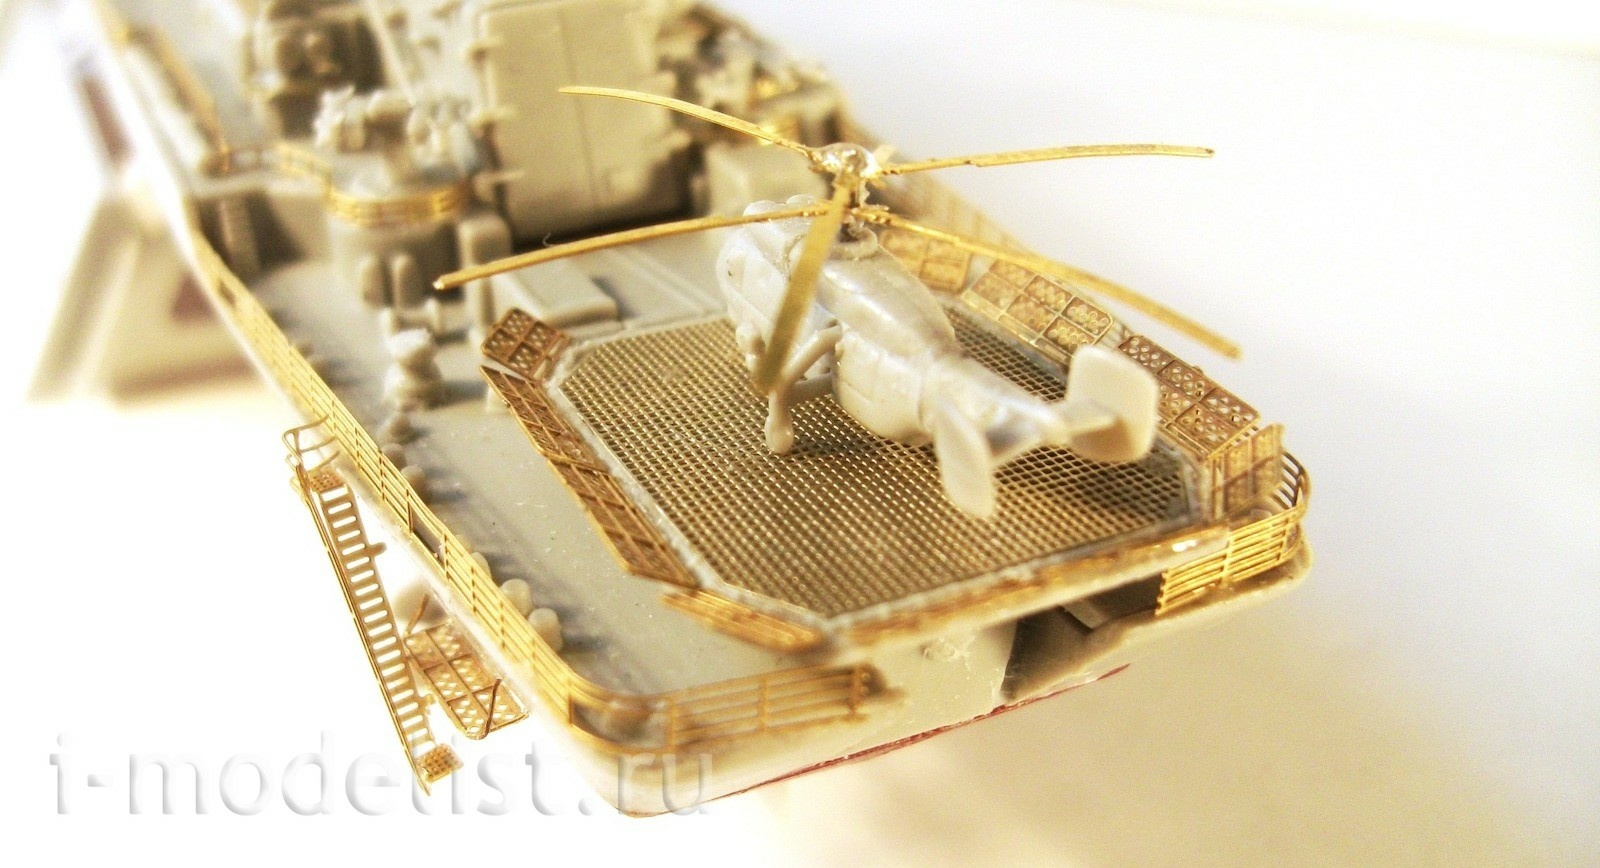 700202 Microdesign 1/700 photo Etching GRKR 